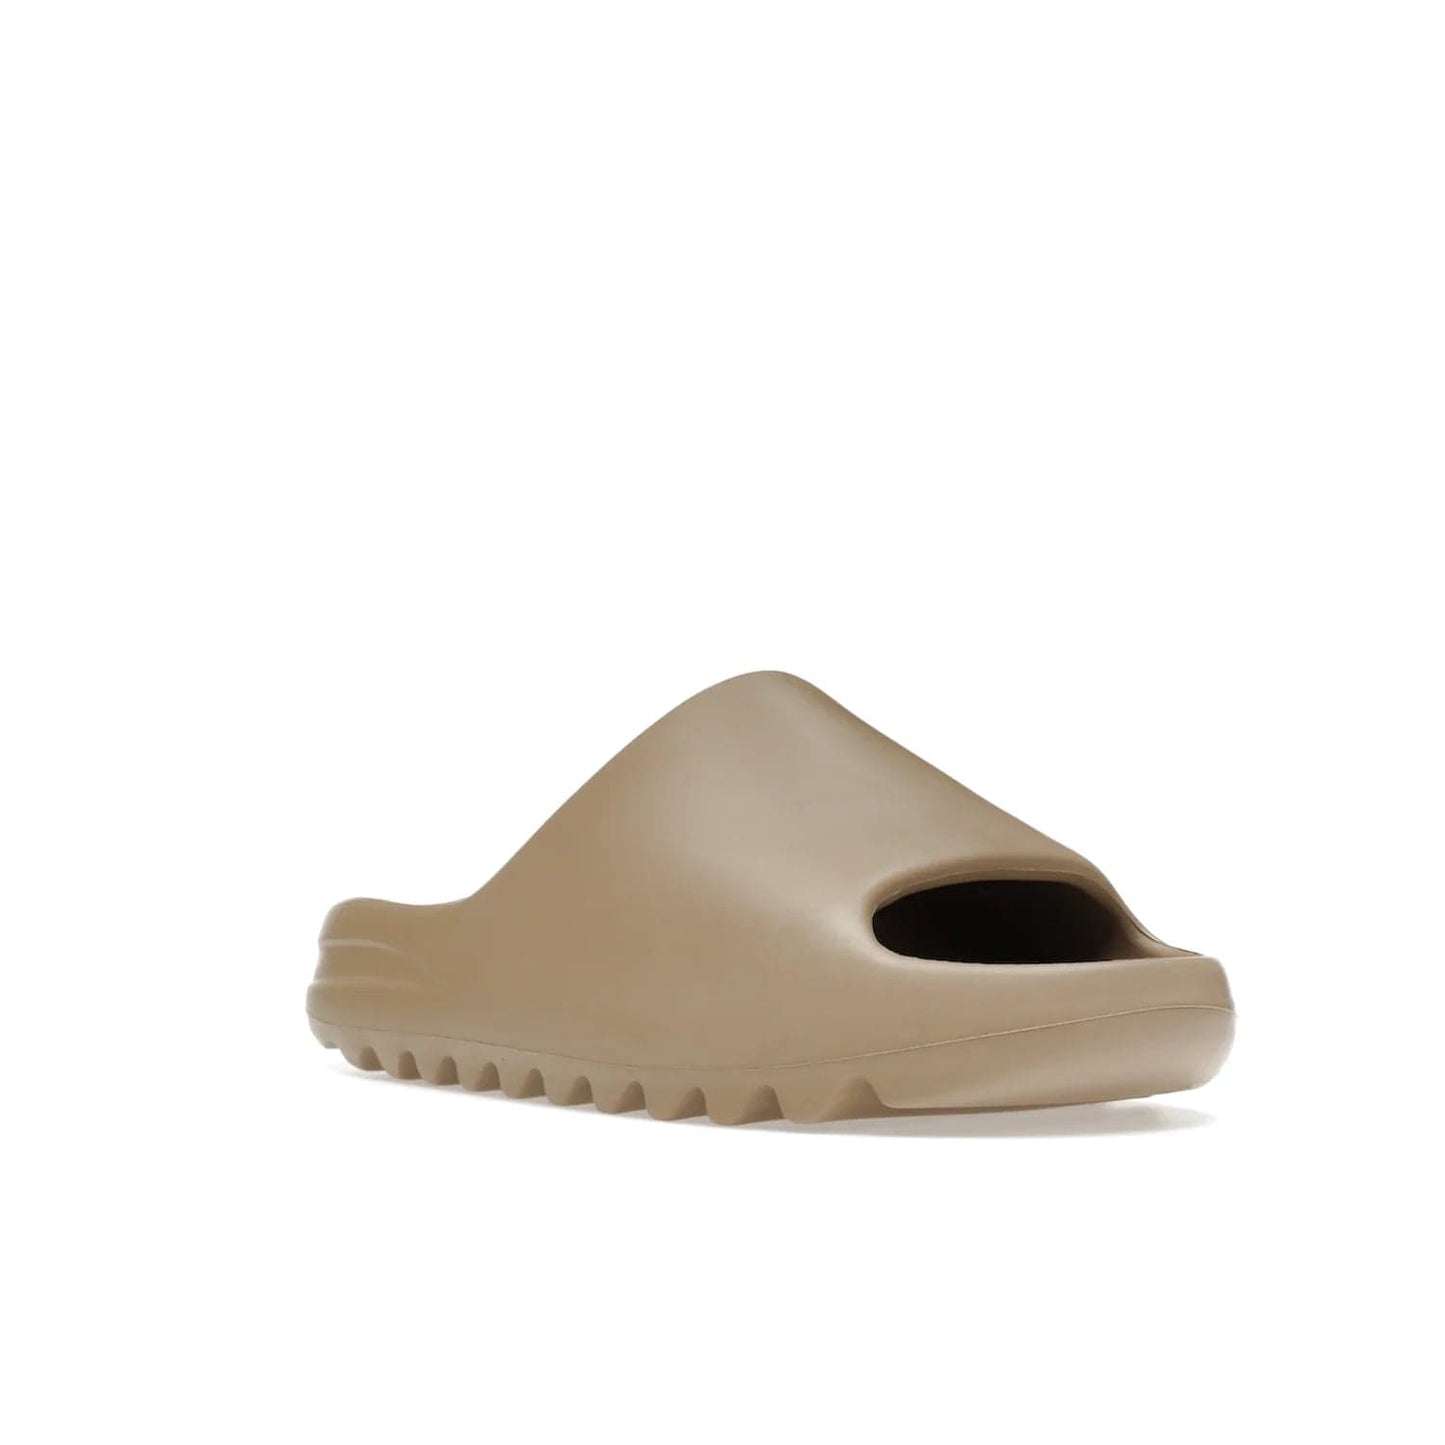 adidas Yeezy Slide Pure (First Release) - Image 6 - Only at www.BallersClubKickz.com - Shop the new adidas Yeezy Slide Pure at adidas. Crafted with a Pure EVA foam upper and soft footbed for instant comfort. Outsole with grooves offers traction & support for a perfect summer look. Available in Pure/Pure/Pure.